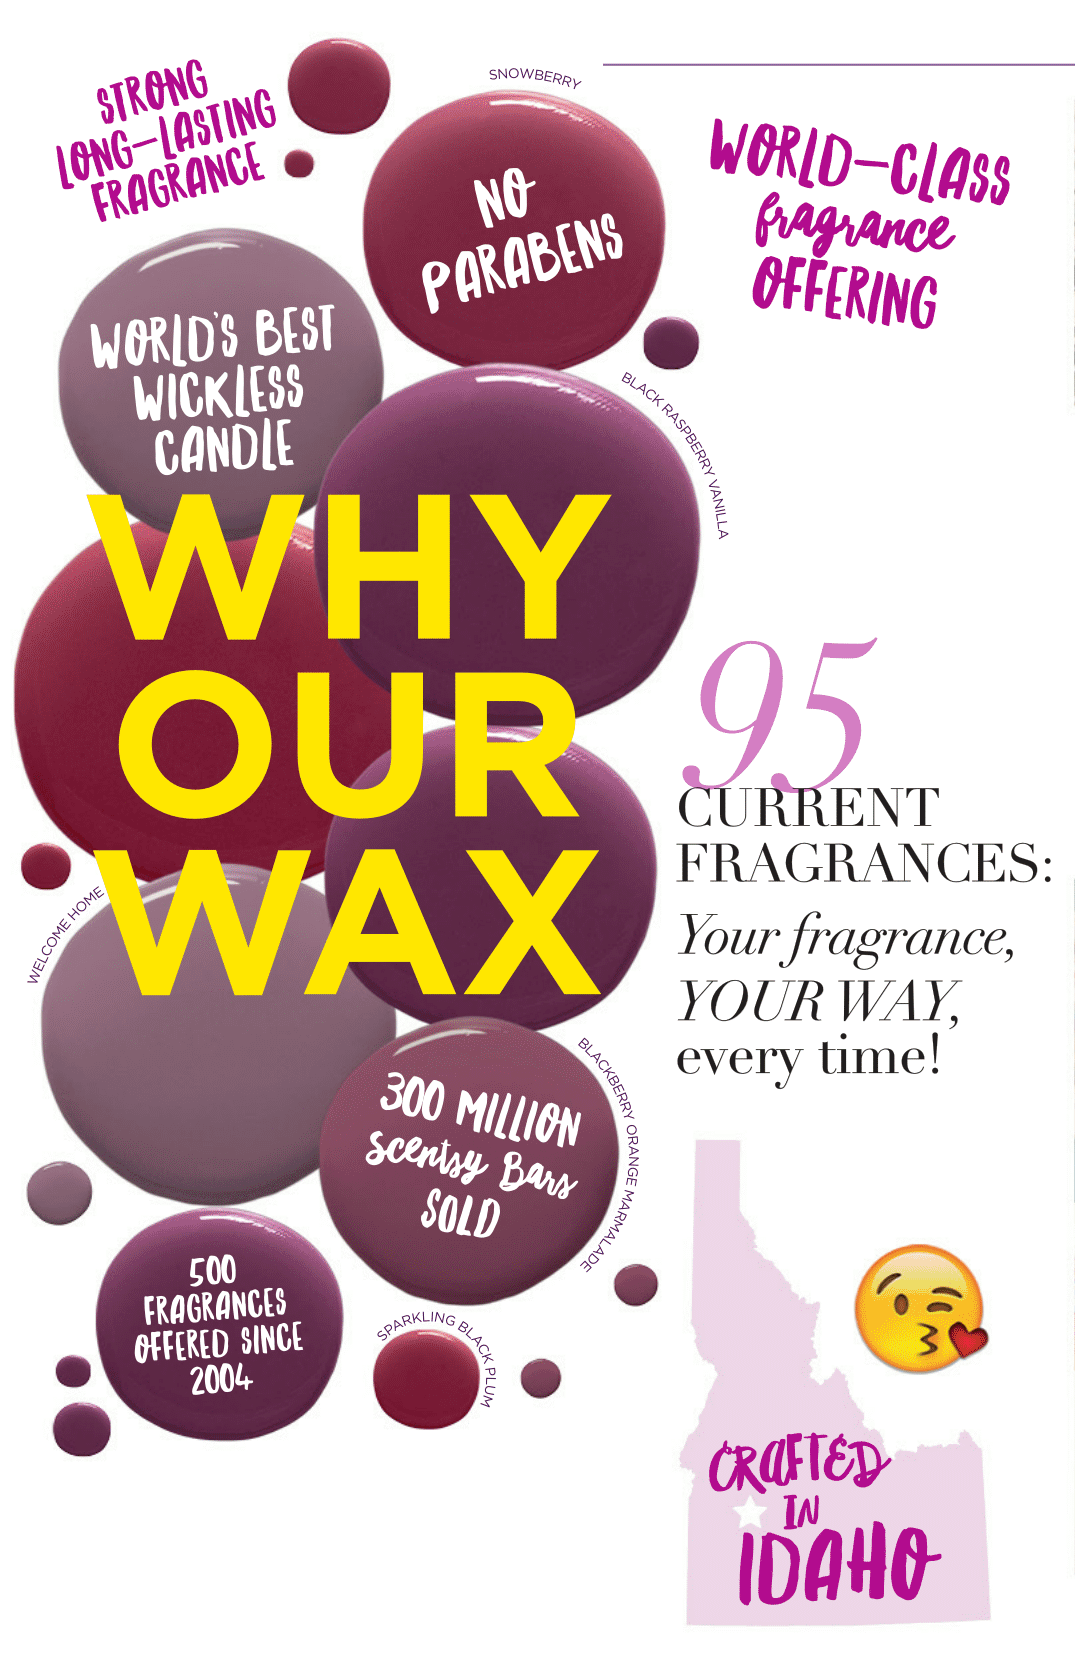 Why Our Wax? - Scentsy